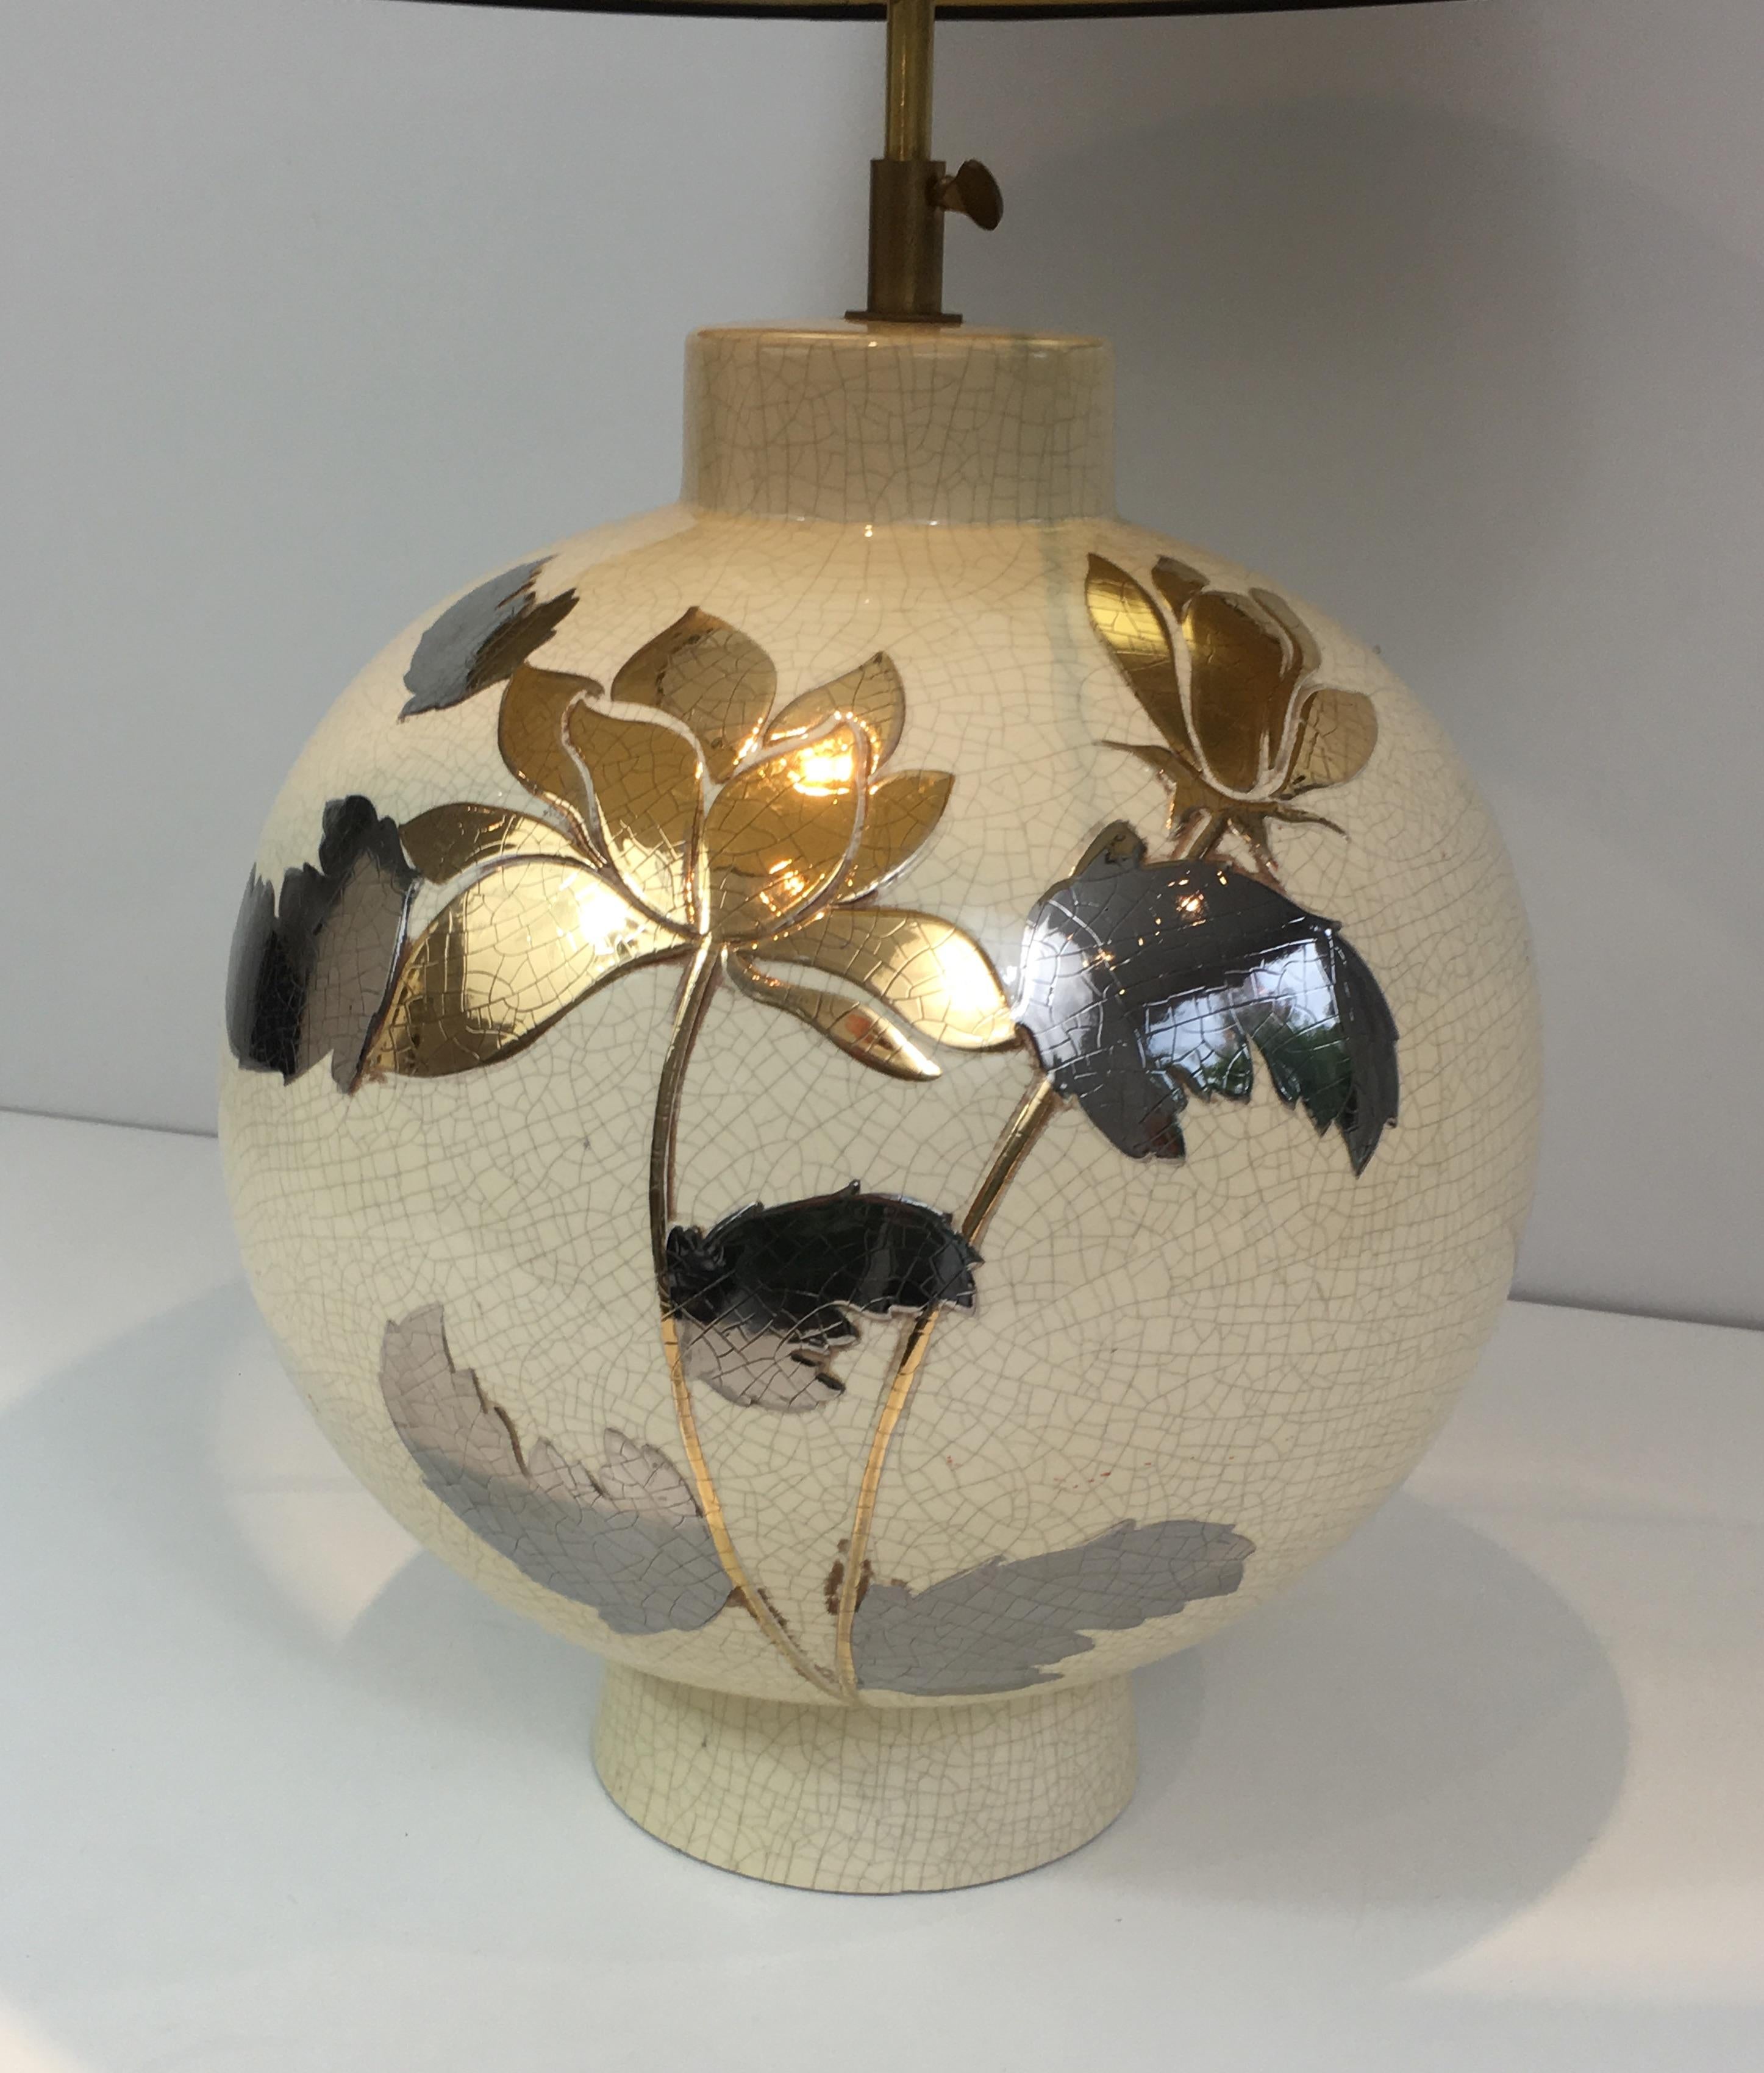 By L Drummer, Cracked Ceramic Lamp with Silver and Gold Flower Decoration on the 3